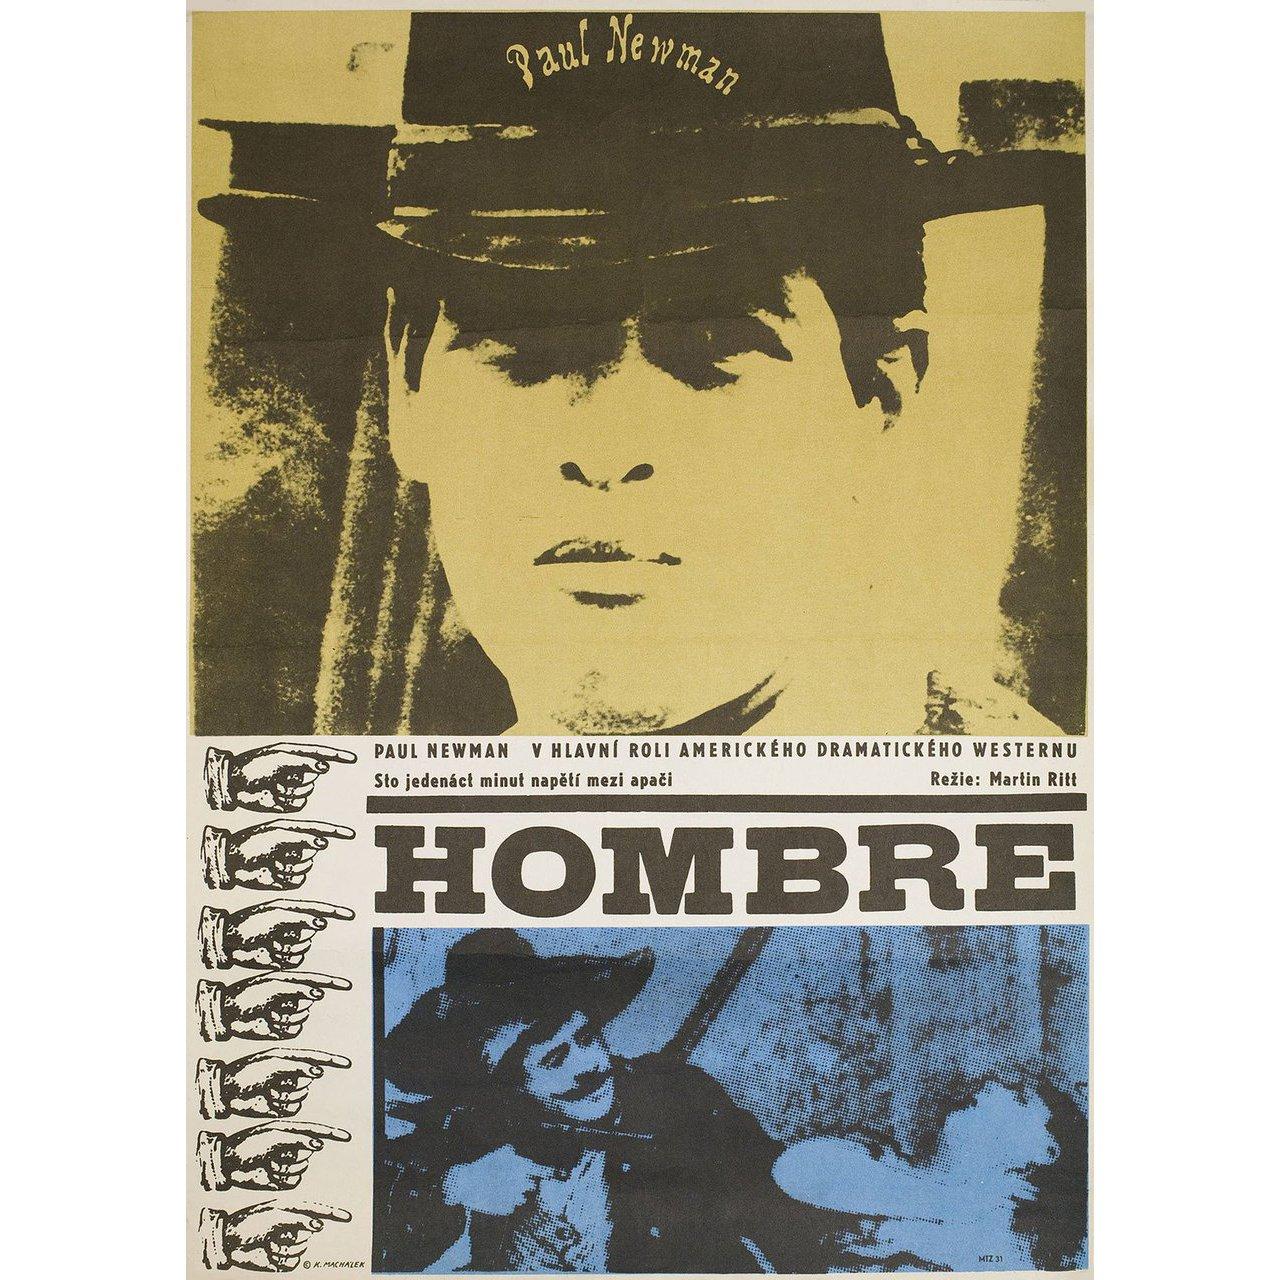 Original 1967 Czech A3 poster by Karel Machalek for the film “Hombre” directed by Martin Ritt with Paul Newman / Fredric March / Richard Boone / Diane Cilento. Fine condition, rolled. Please note: the size is stated in inches and the actual size can